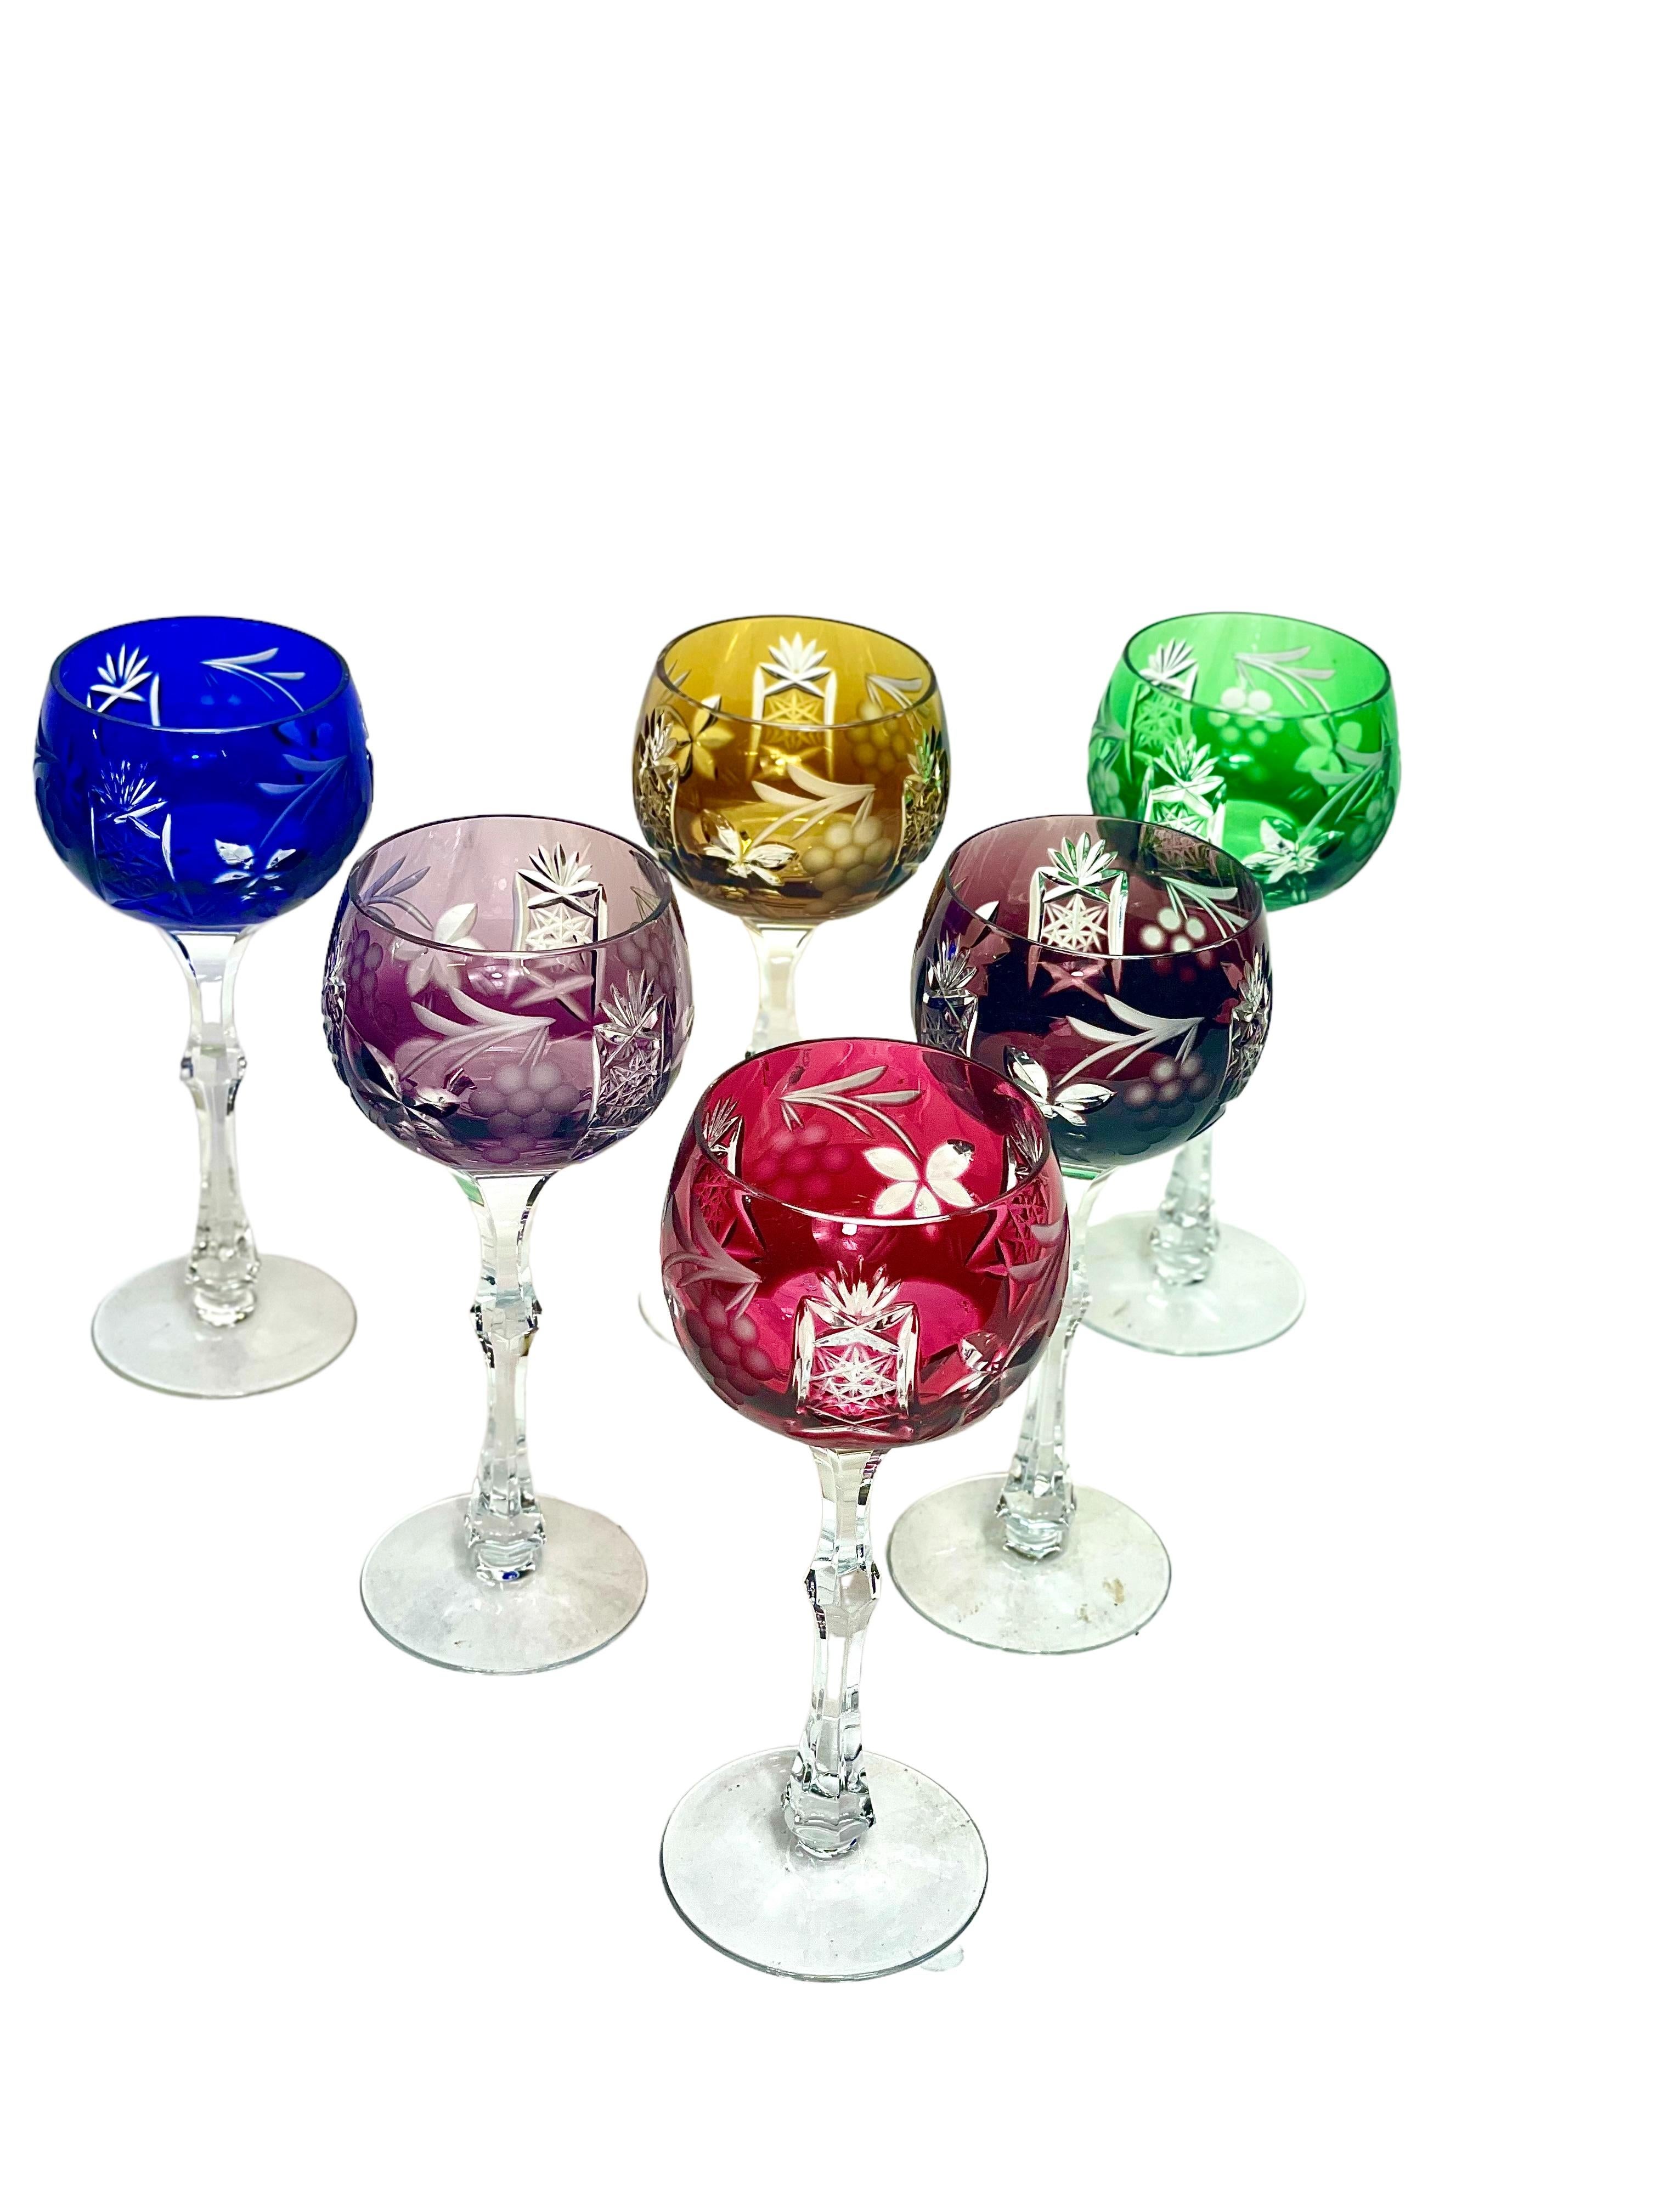 This sparkling set of six crystal Rhine (or white) wine glasses in an array of six vibrant colours features a delicate, hand-cut design of grape vines and stylised leaves. Each cut-to-clear crystal glass has a cut and faceted stem, with a simple